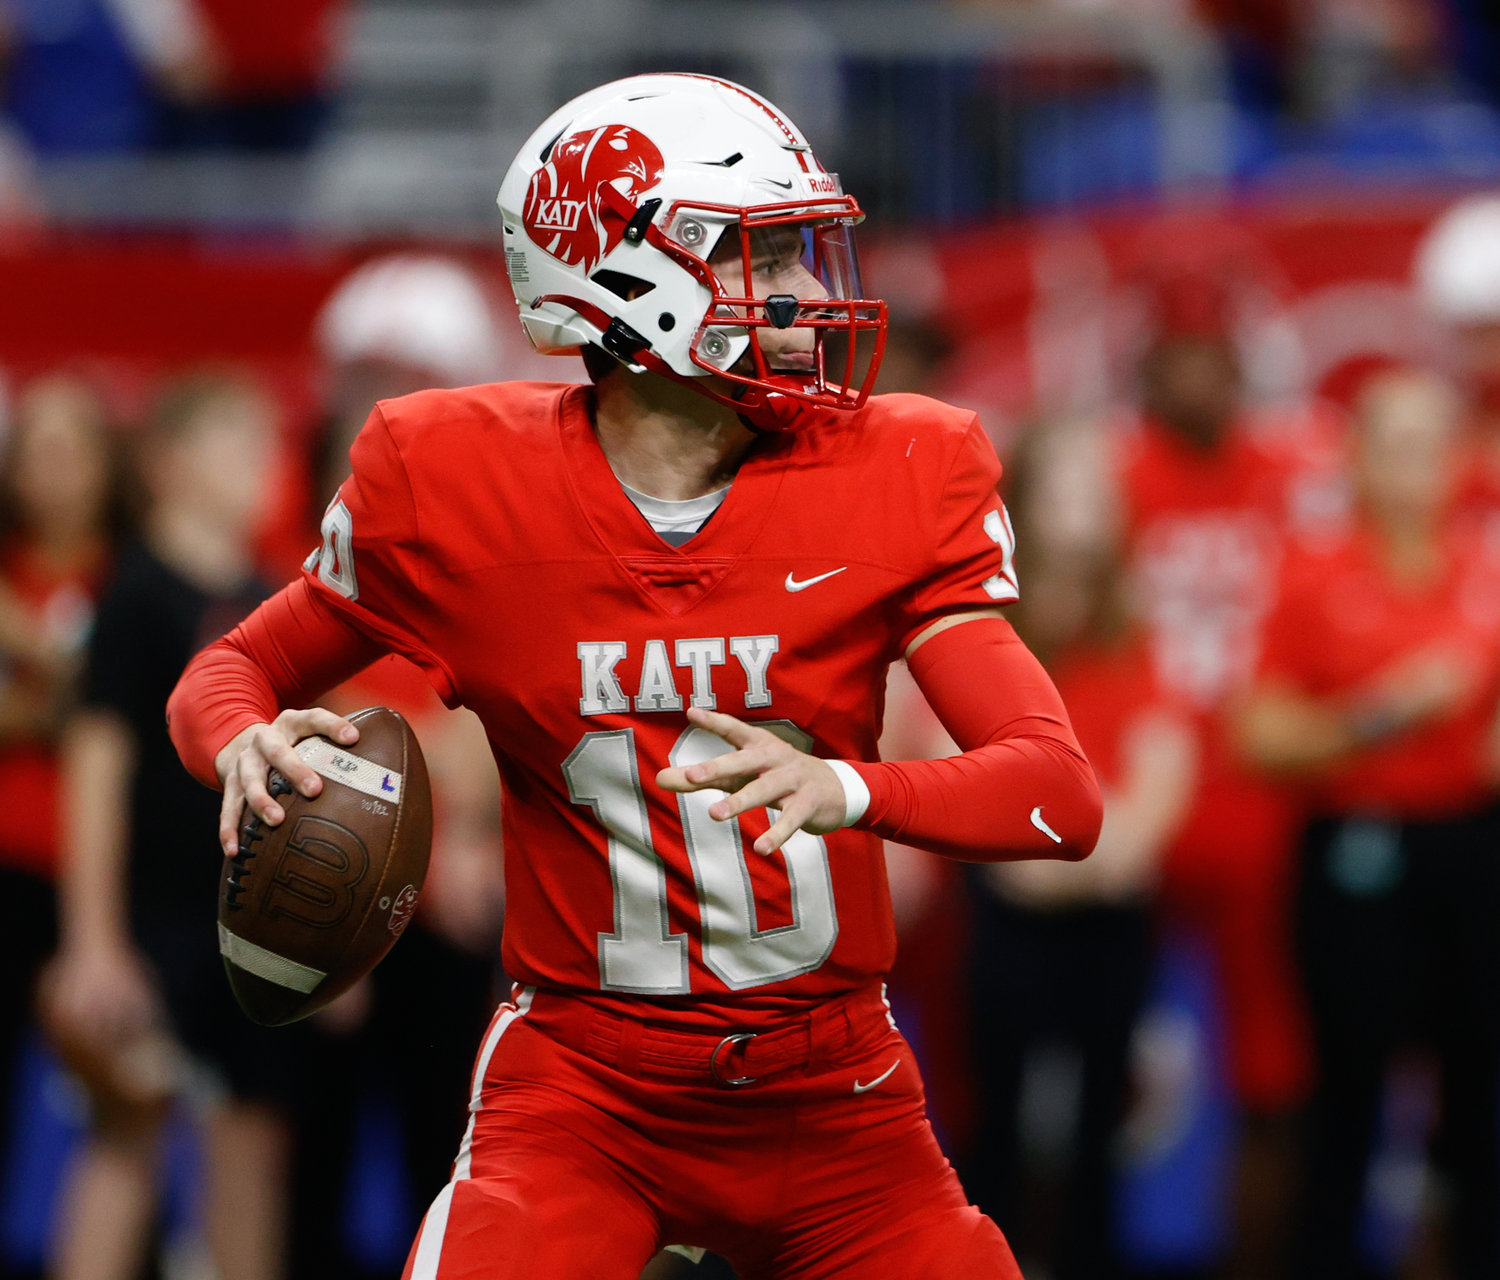 Katy quarterback Caleb Koger (10) passes the ball during the Class 6A-DII state semifinal football game between Katy and Vandegrift on Dec. 10, 2022 in San Antonio.